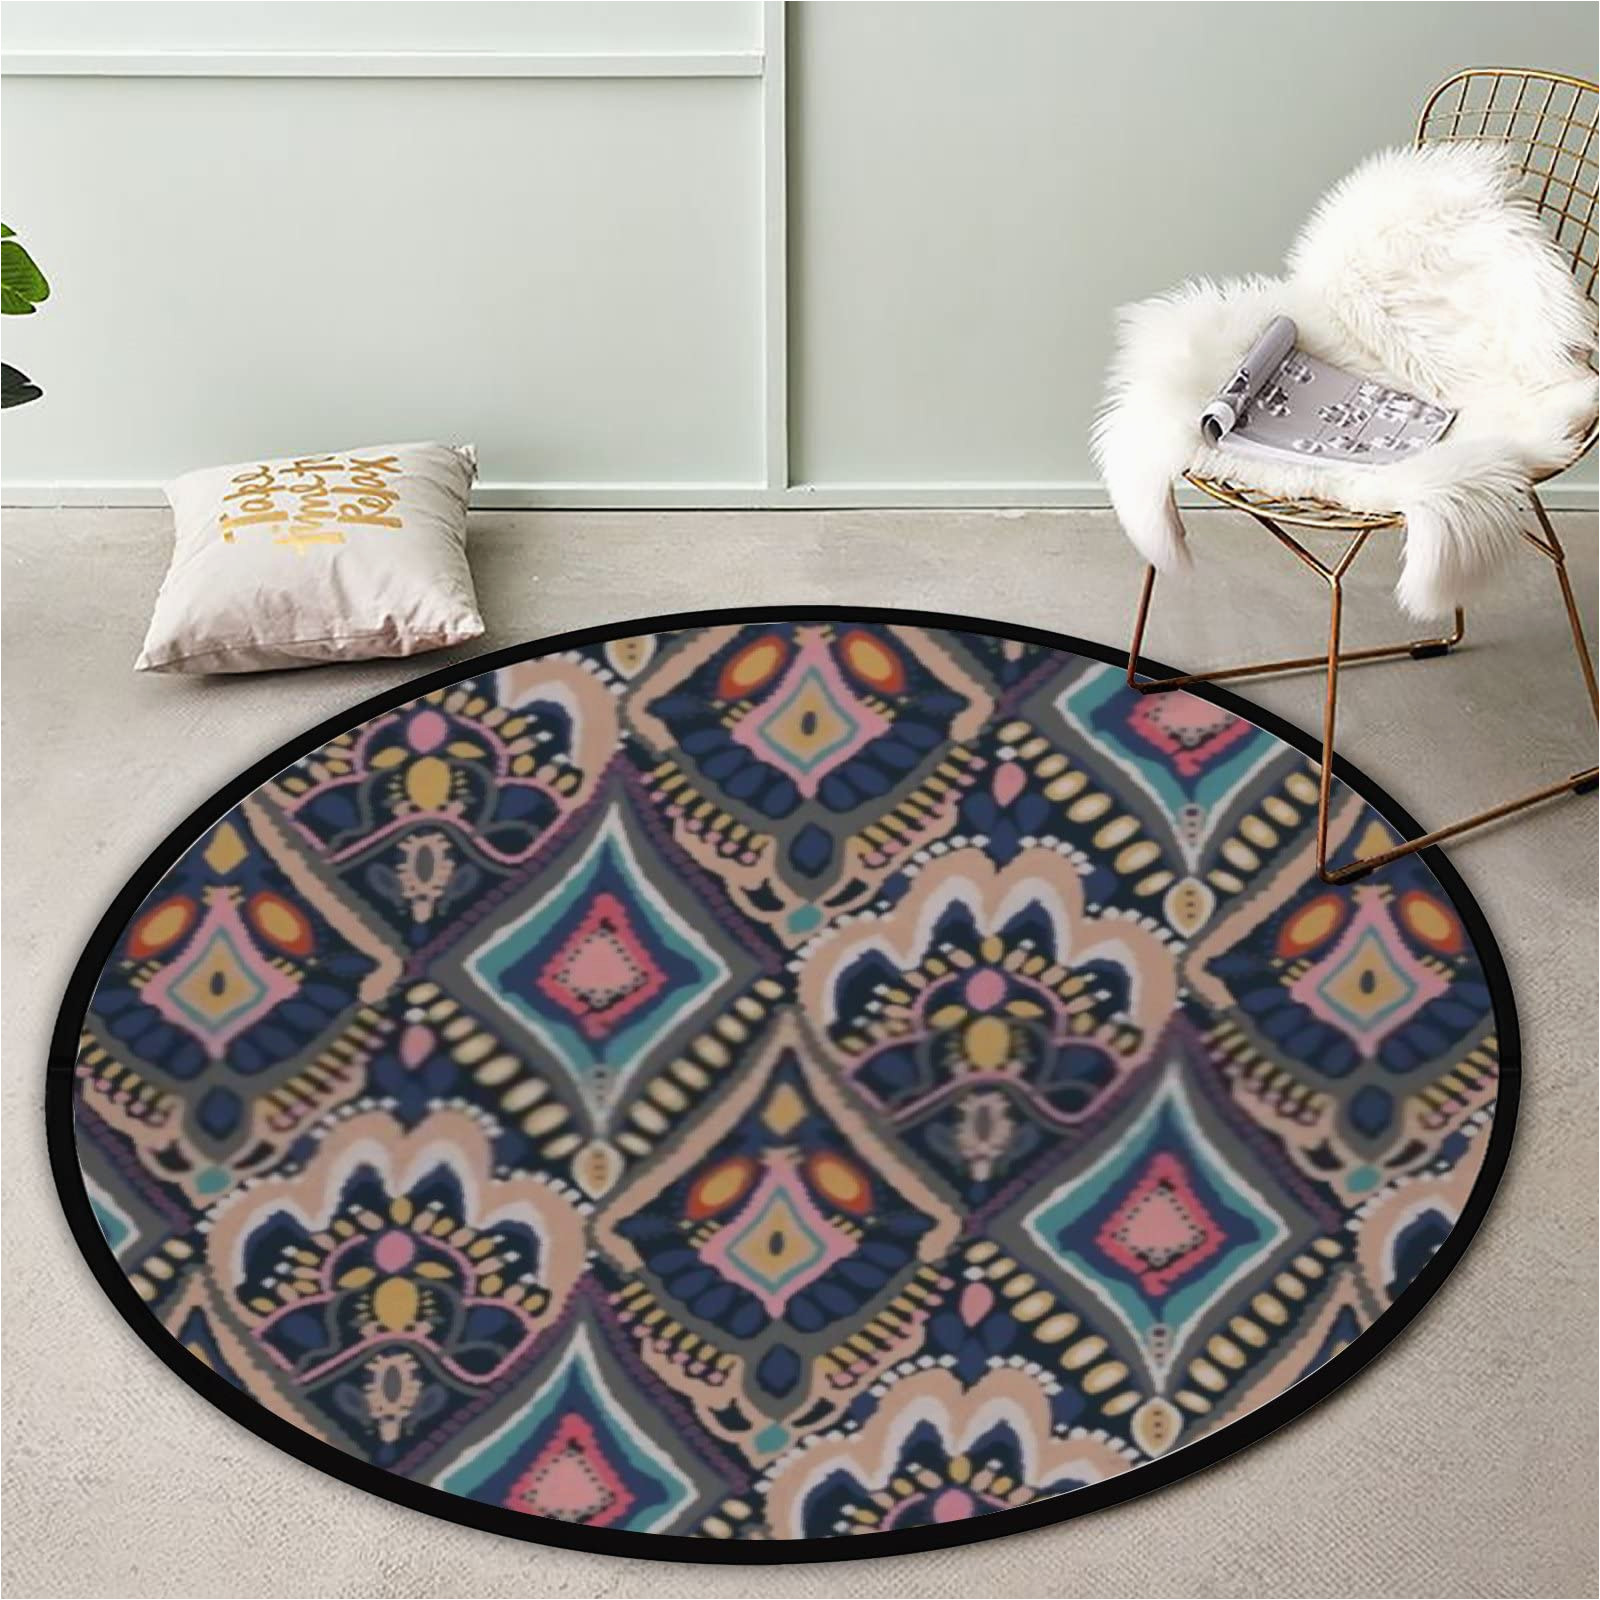 36 Inch Round area Rug Round area Rug 3 Ft Colorful Ethnic Tribal Geometric Texture Collection Round Mats Accent Throw Rugs Floor Carpet Bedroom Study Kitchens Dining Living …